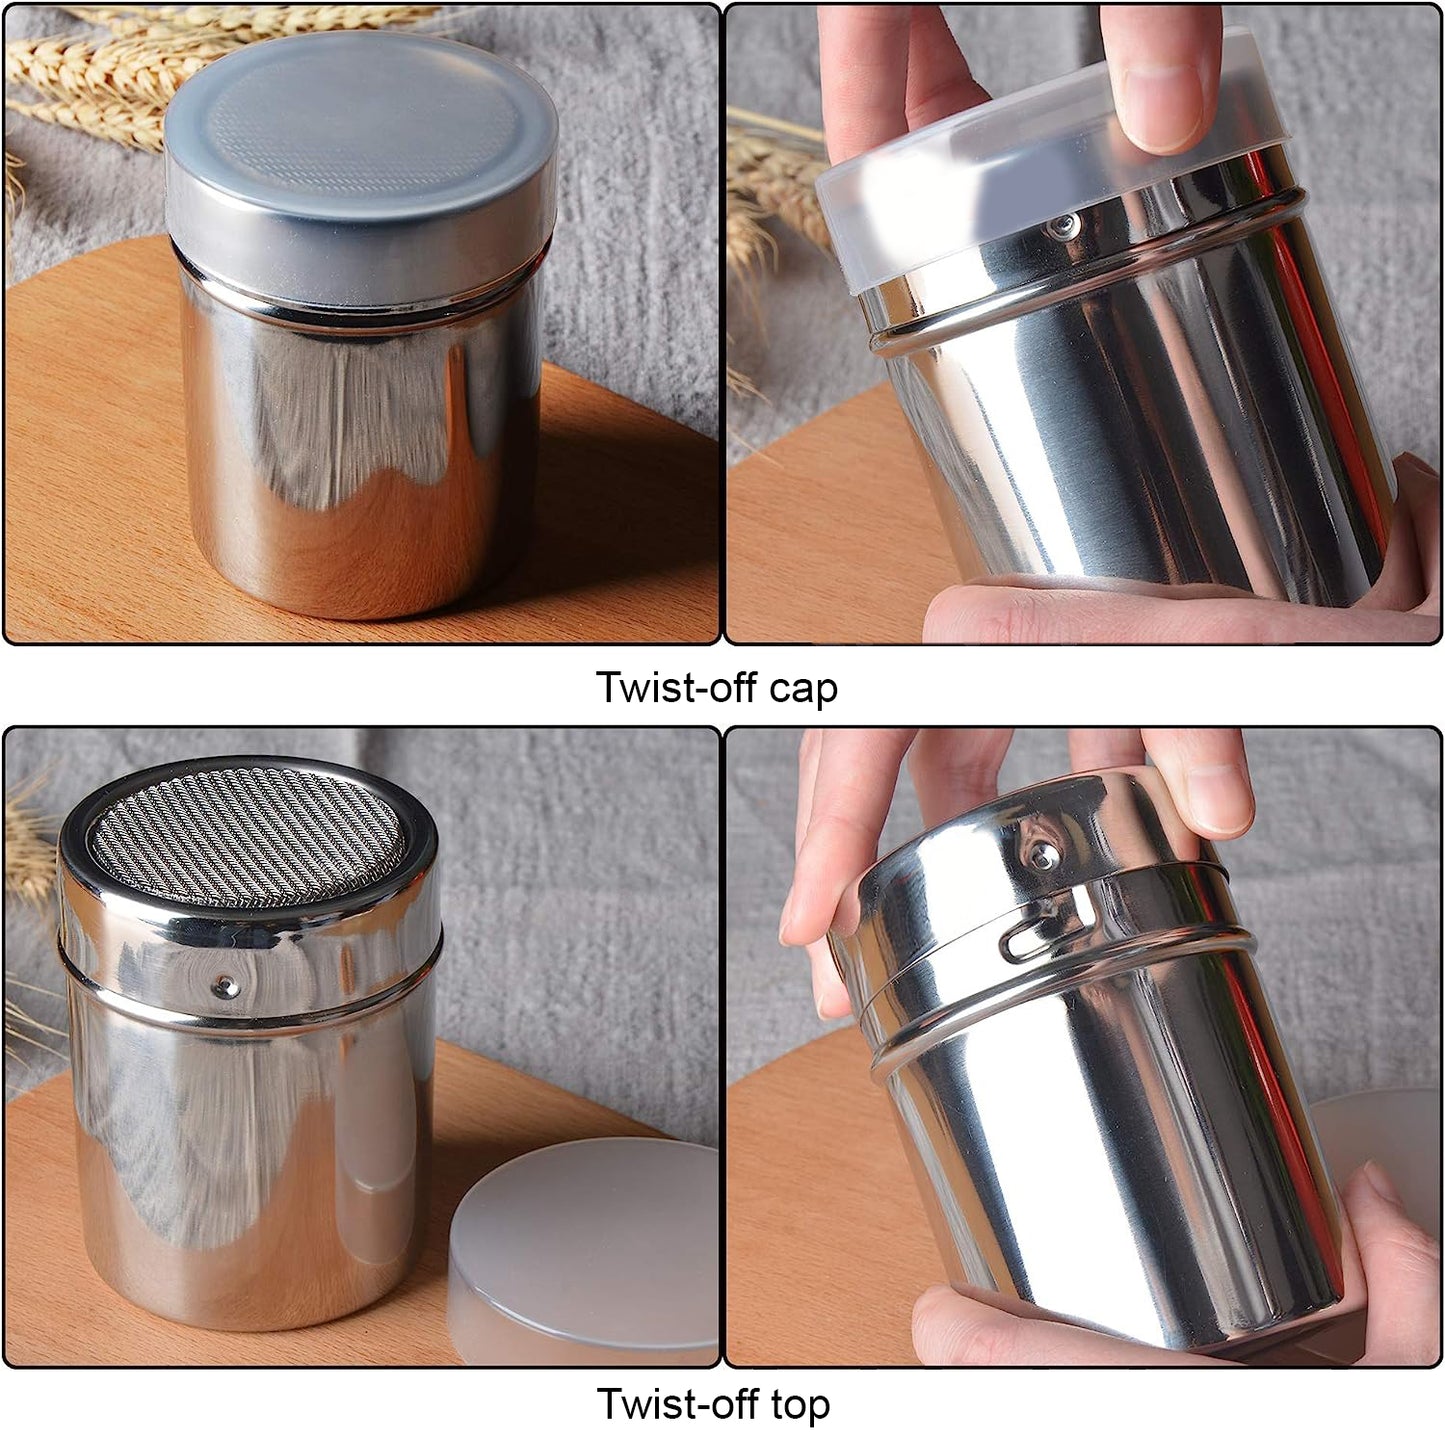 Cuisinox Powder Sugar Shaker with Lid, 304 Stainless Steel Powder Shaker Duster/ Mesh Sifter Sprinkler for Icing Sugar Cocoa Cinnamon Chocolate Flour